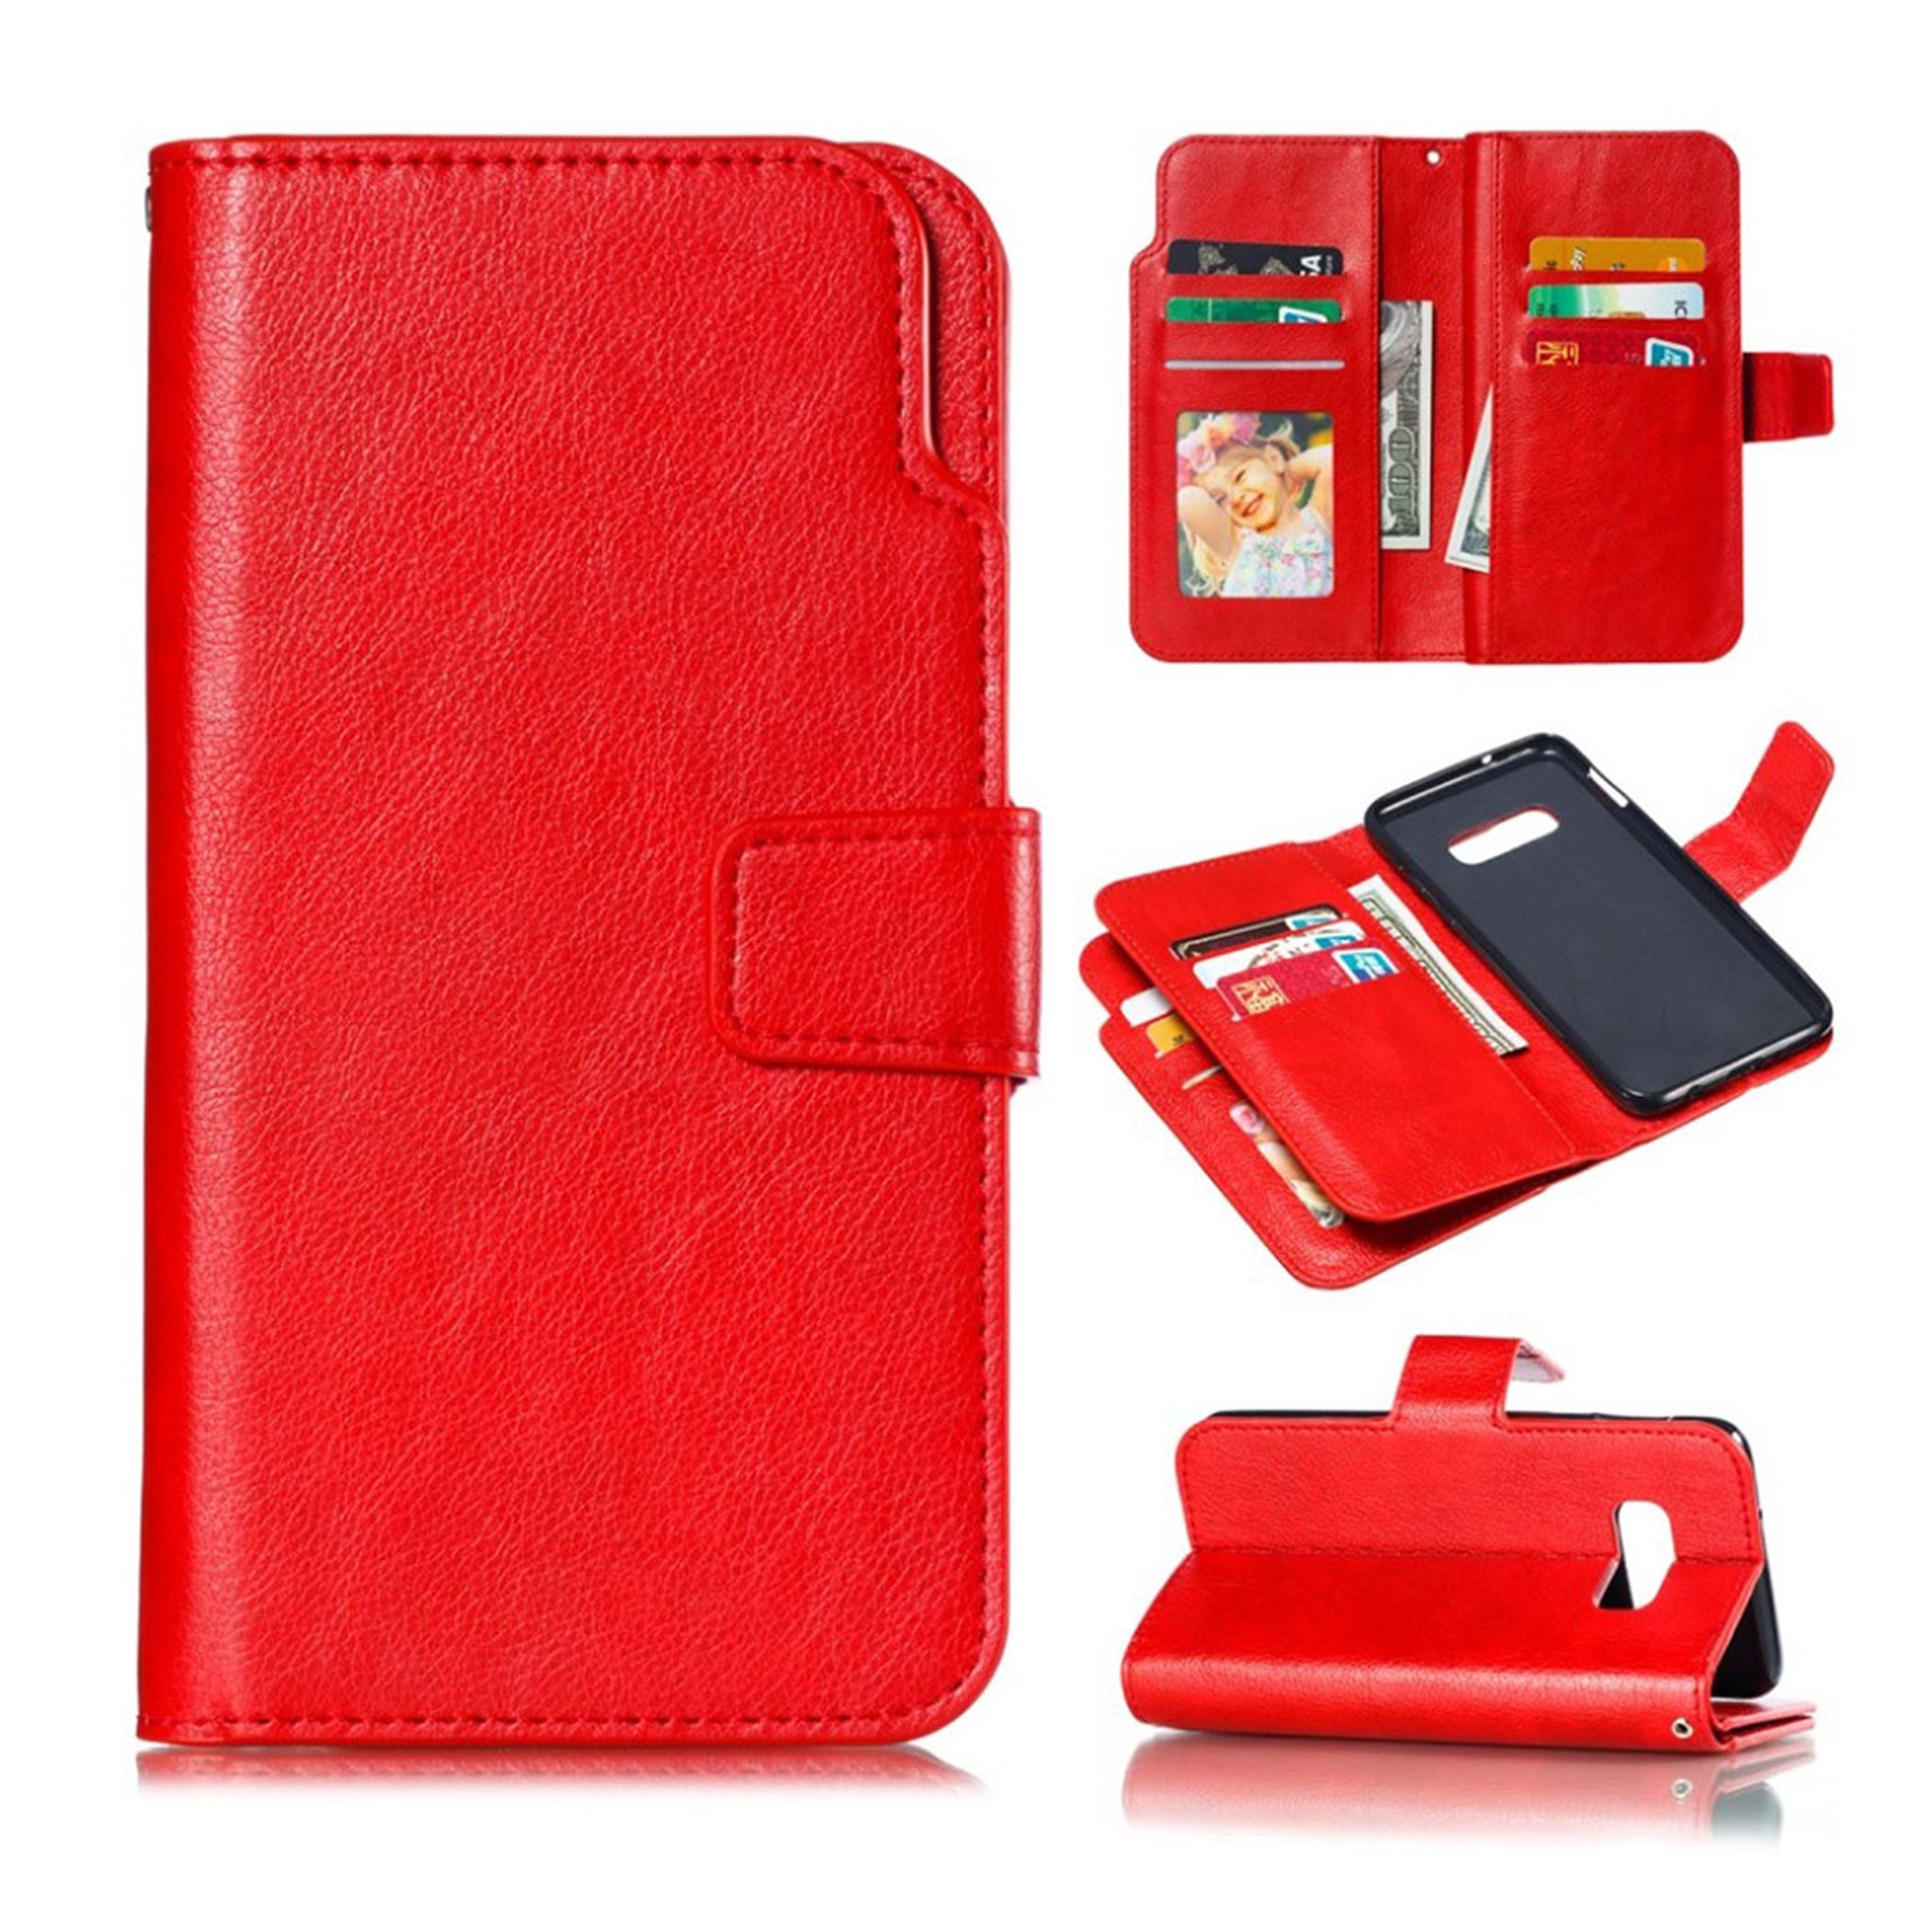 Crazy Horse Samsung Galaxy S10e leather flip case - Red